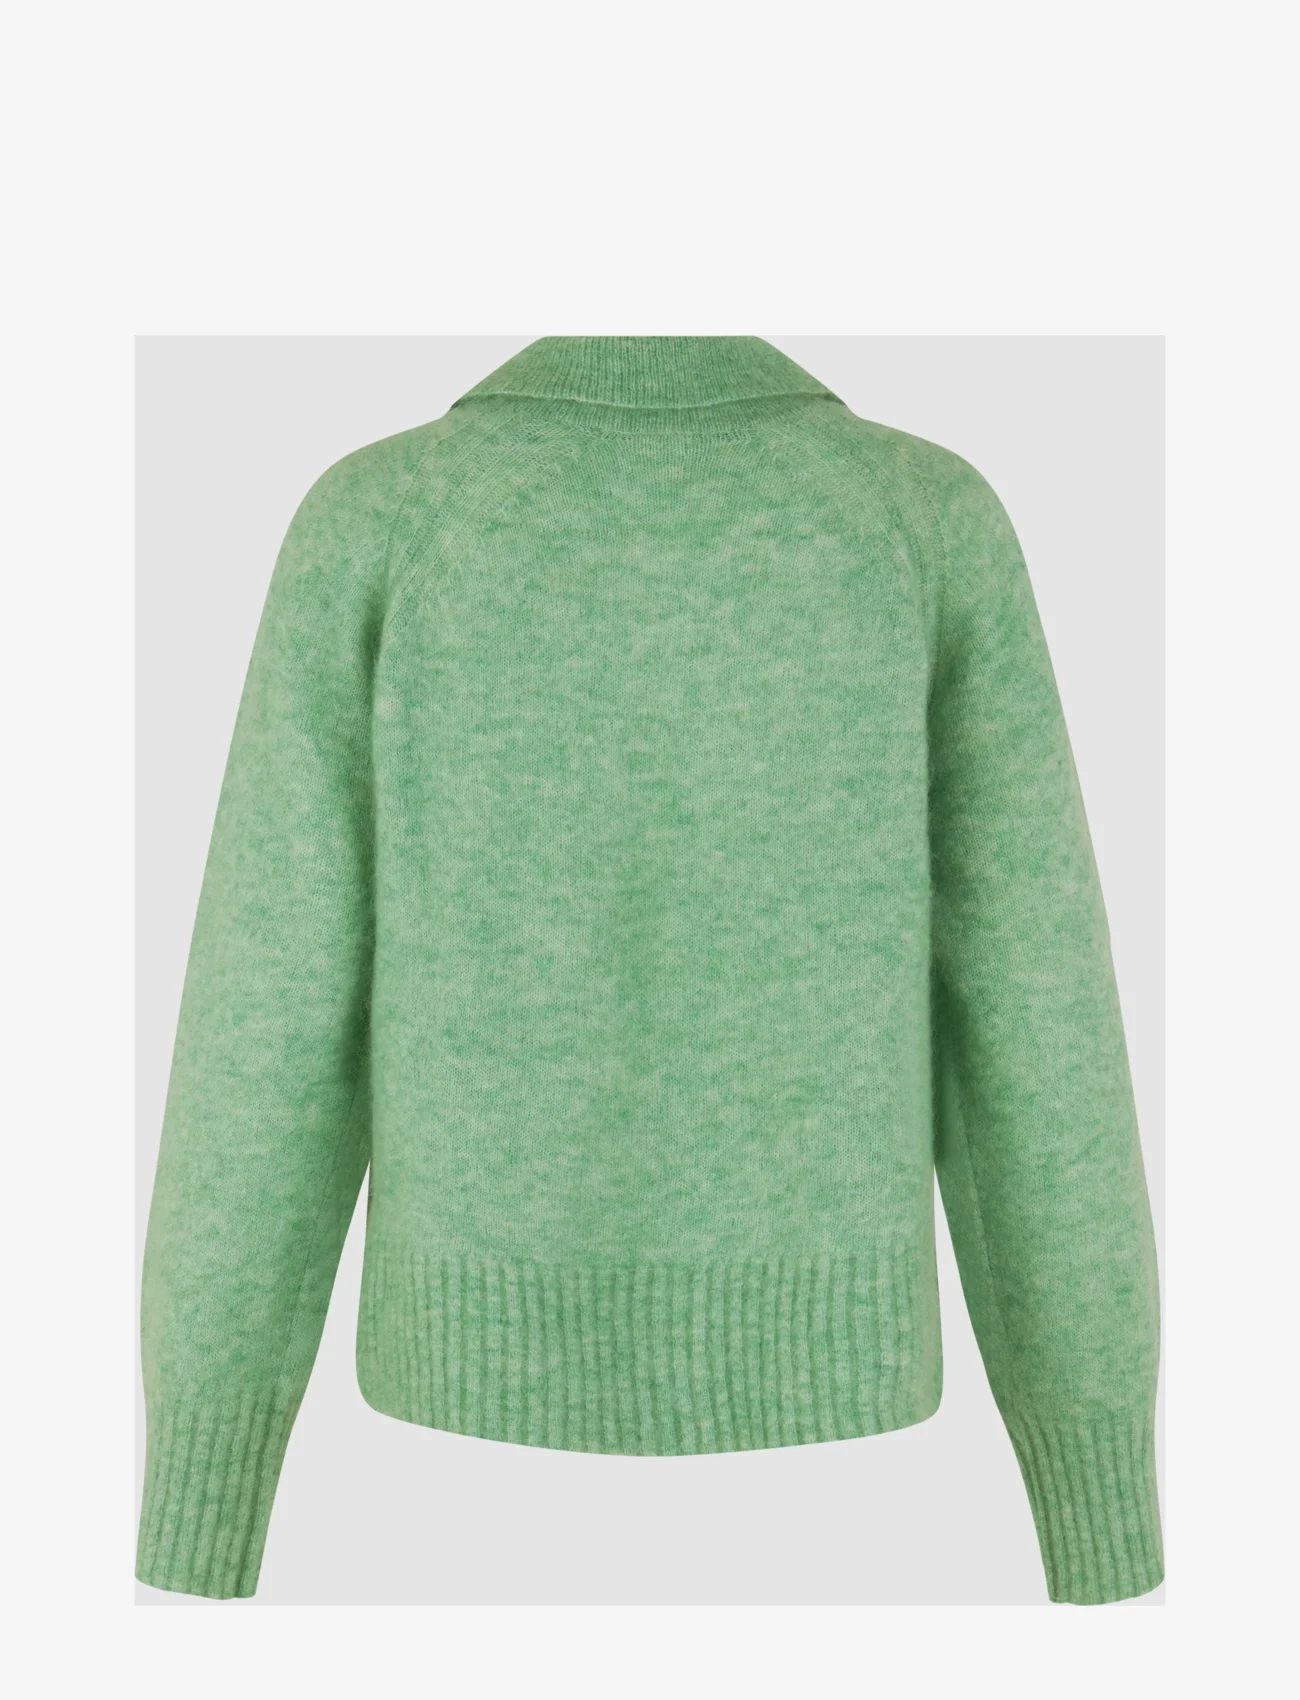 Second Female - Brook Knit Collar - jumpers - laurel green - 1